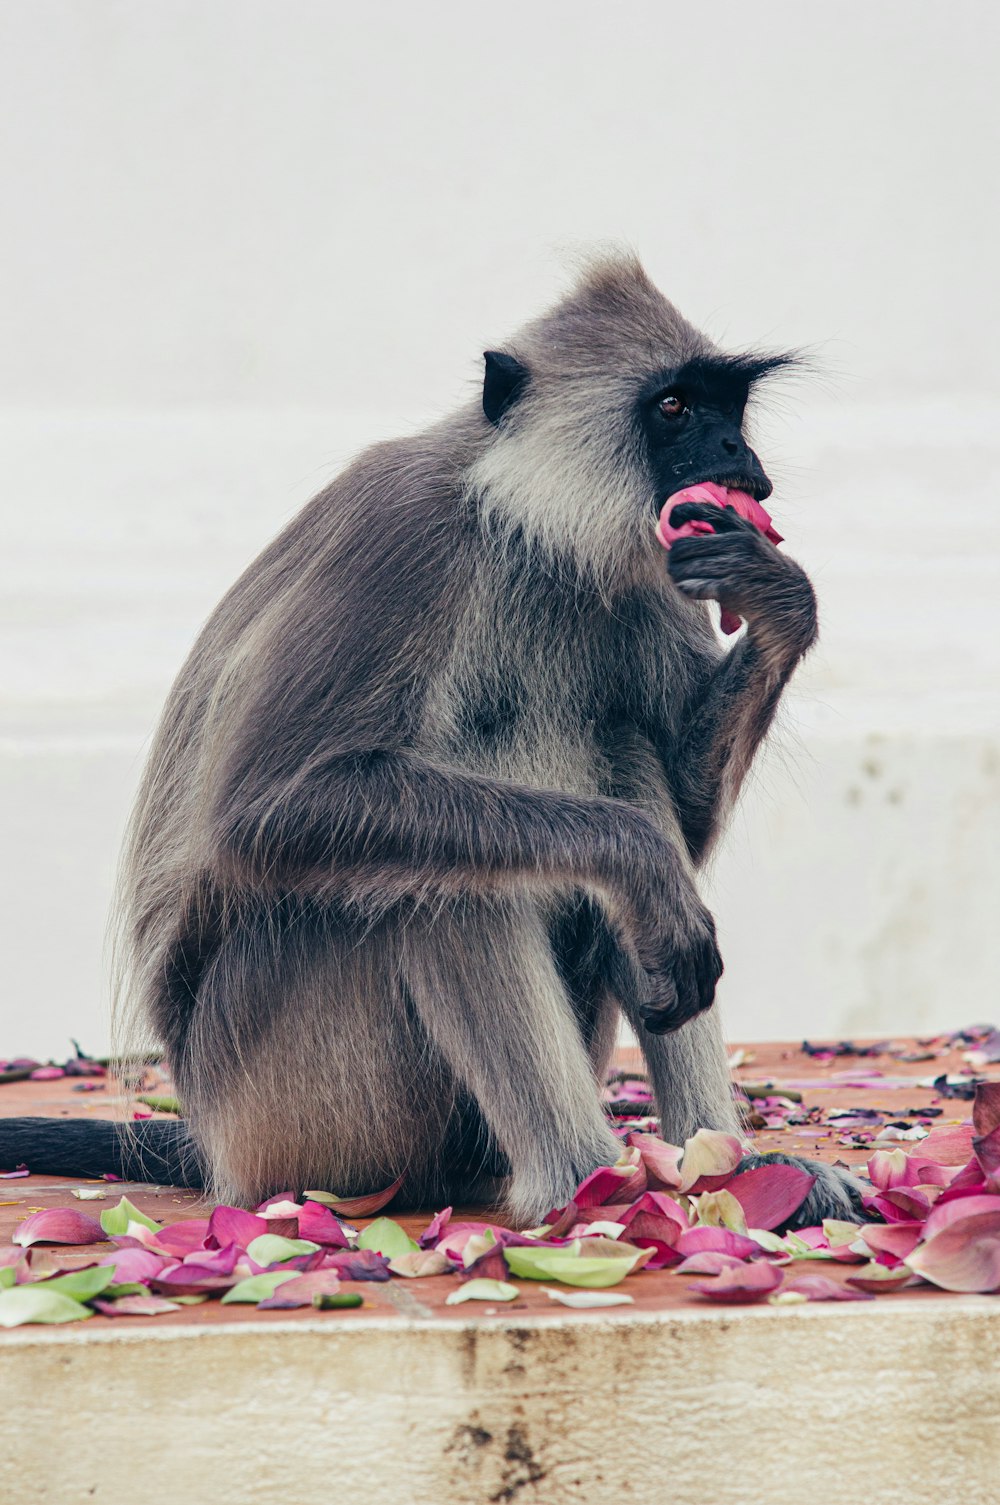 a monkey with its mouth open sitting on the ground